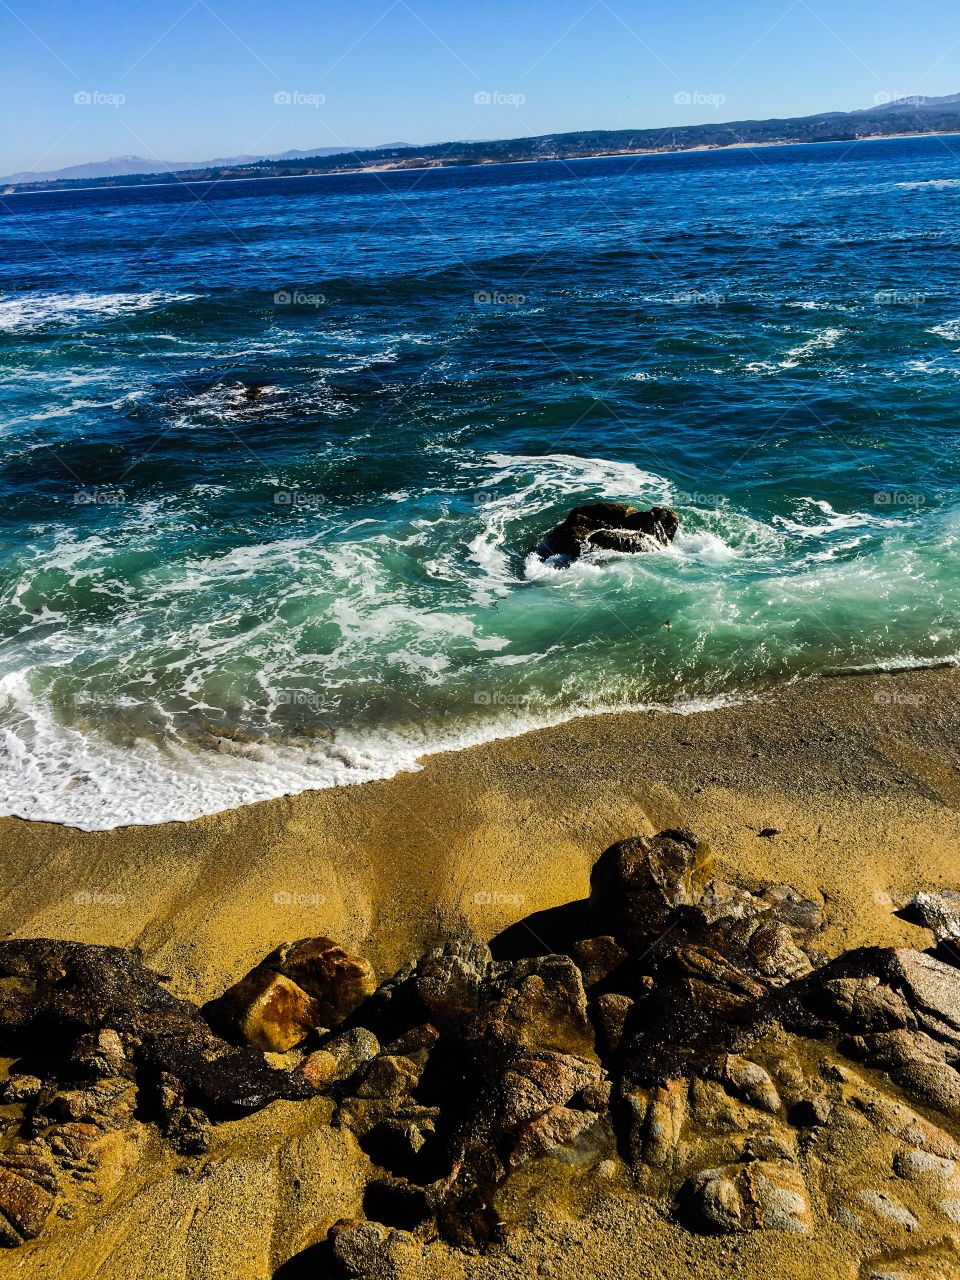 Surf, sand and rocks; surf rolling onto beach in Monterey California 